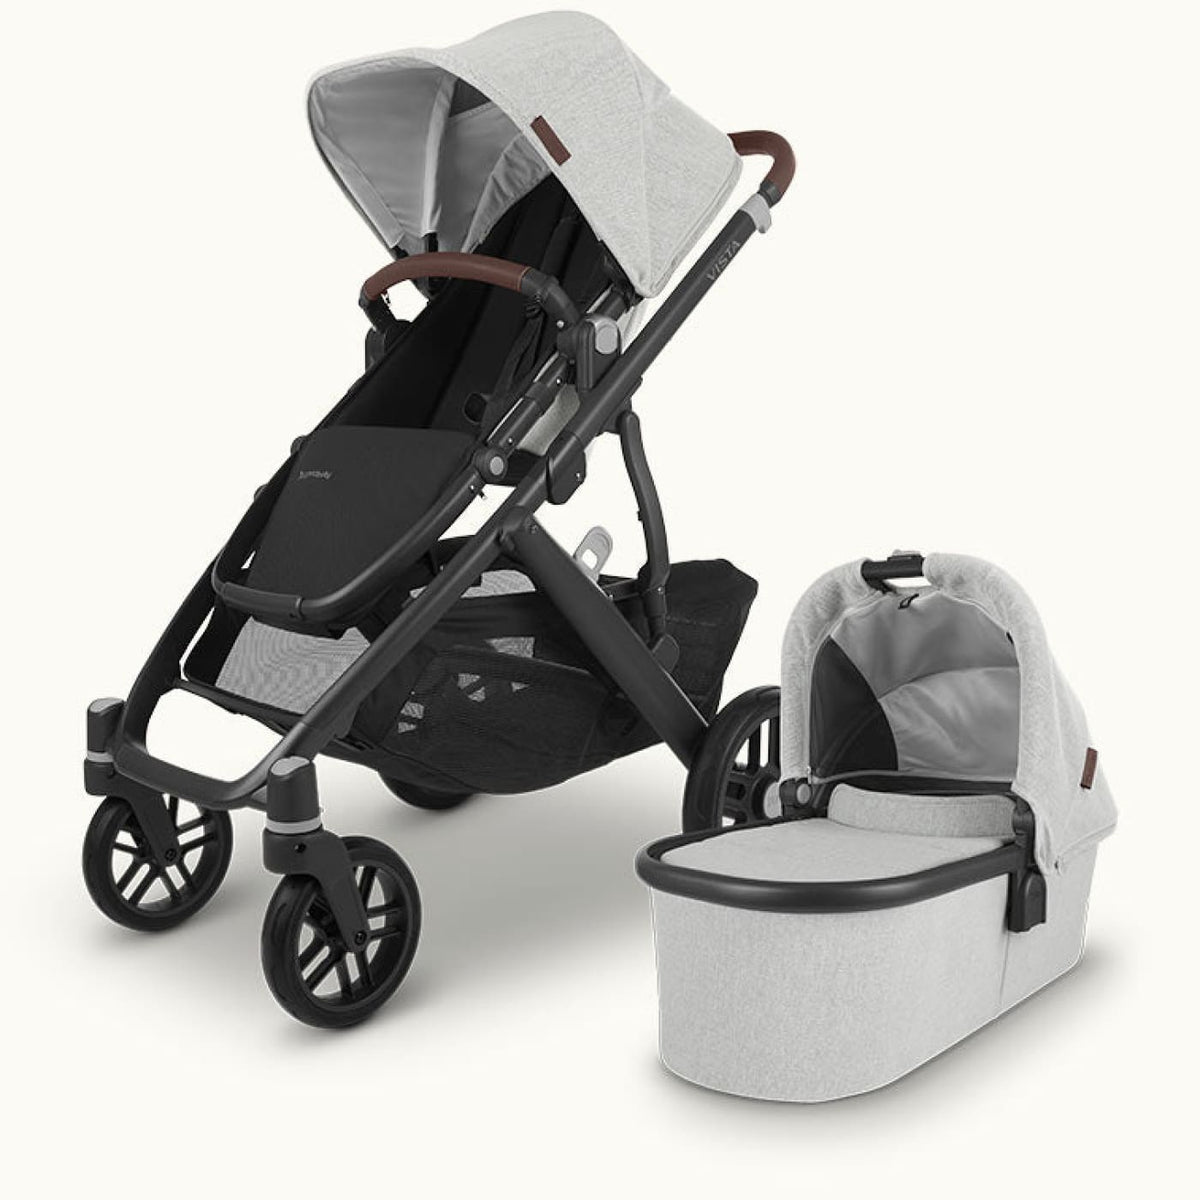 UPPAbaby Vista V2 Stroller with Bassinet and BONUS Upper Adaptors - Anthony (White &amp; Grey Chenille/Carbon/Chestnut Leather Leather) -